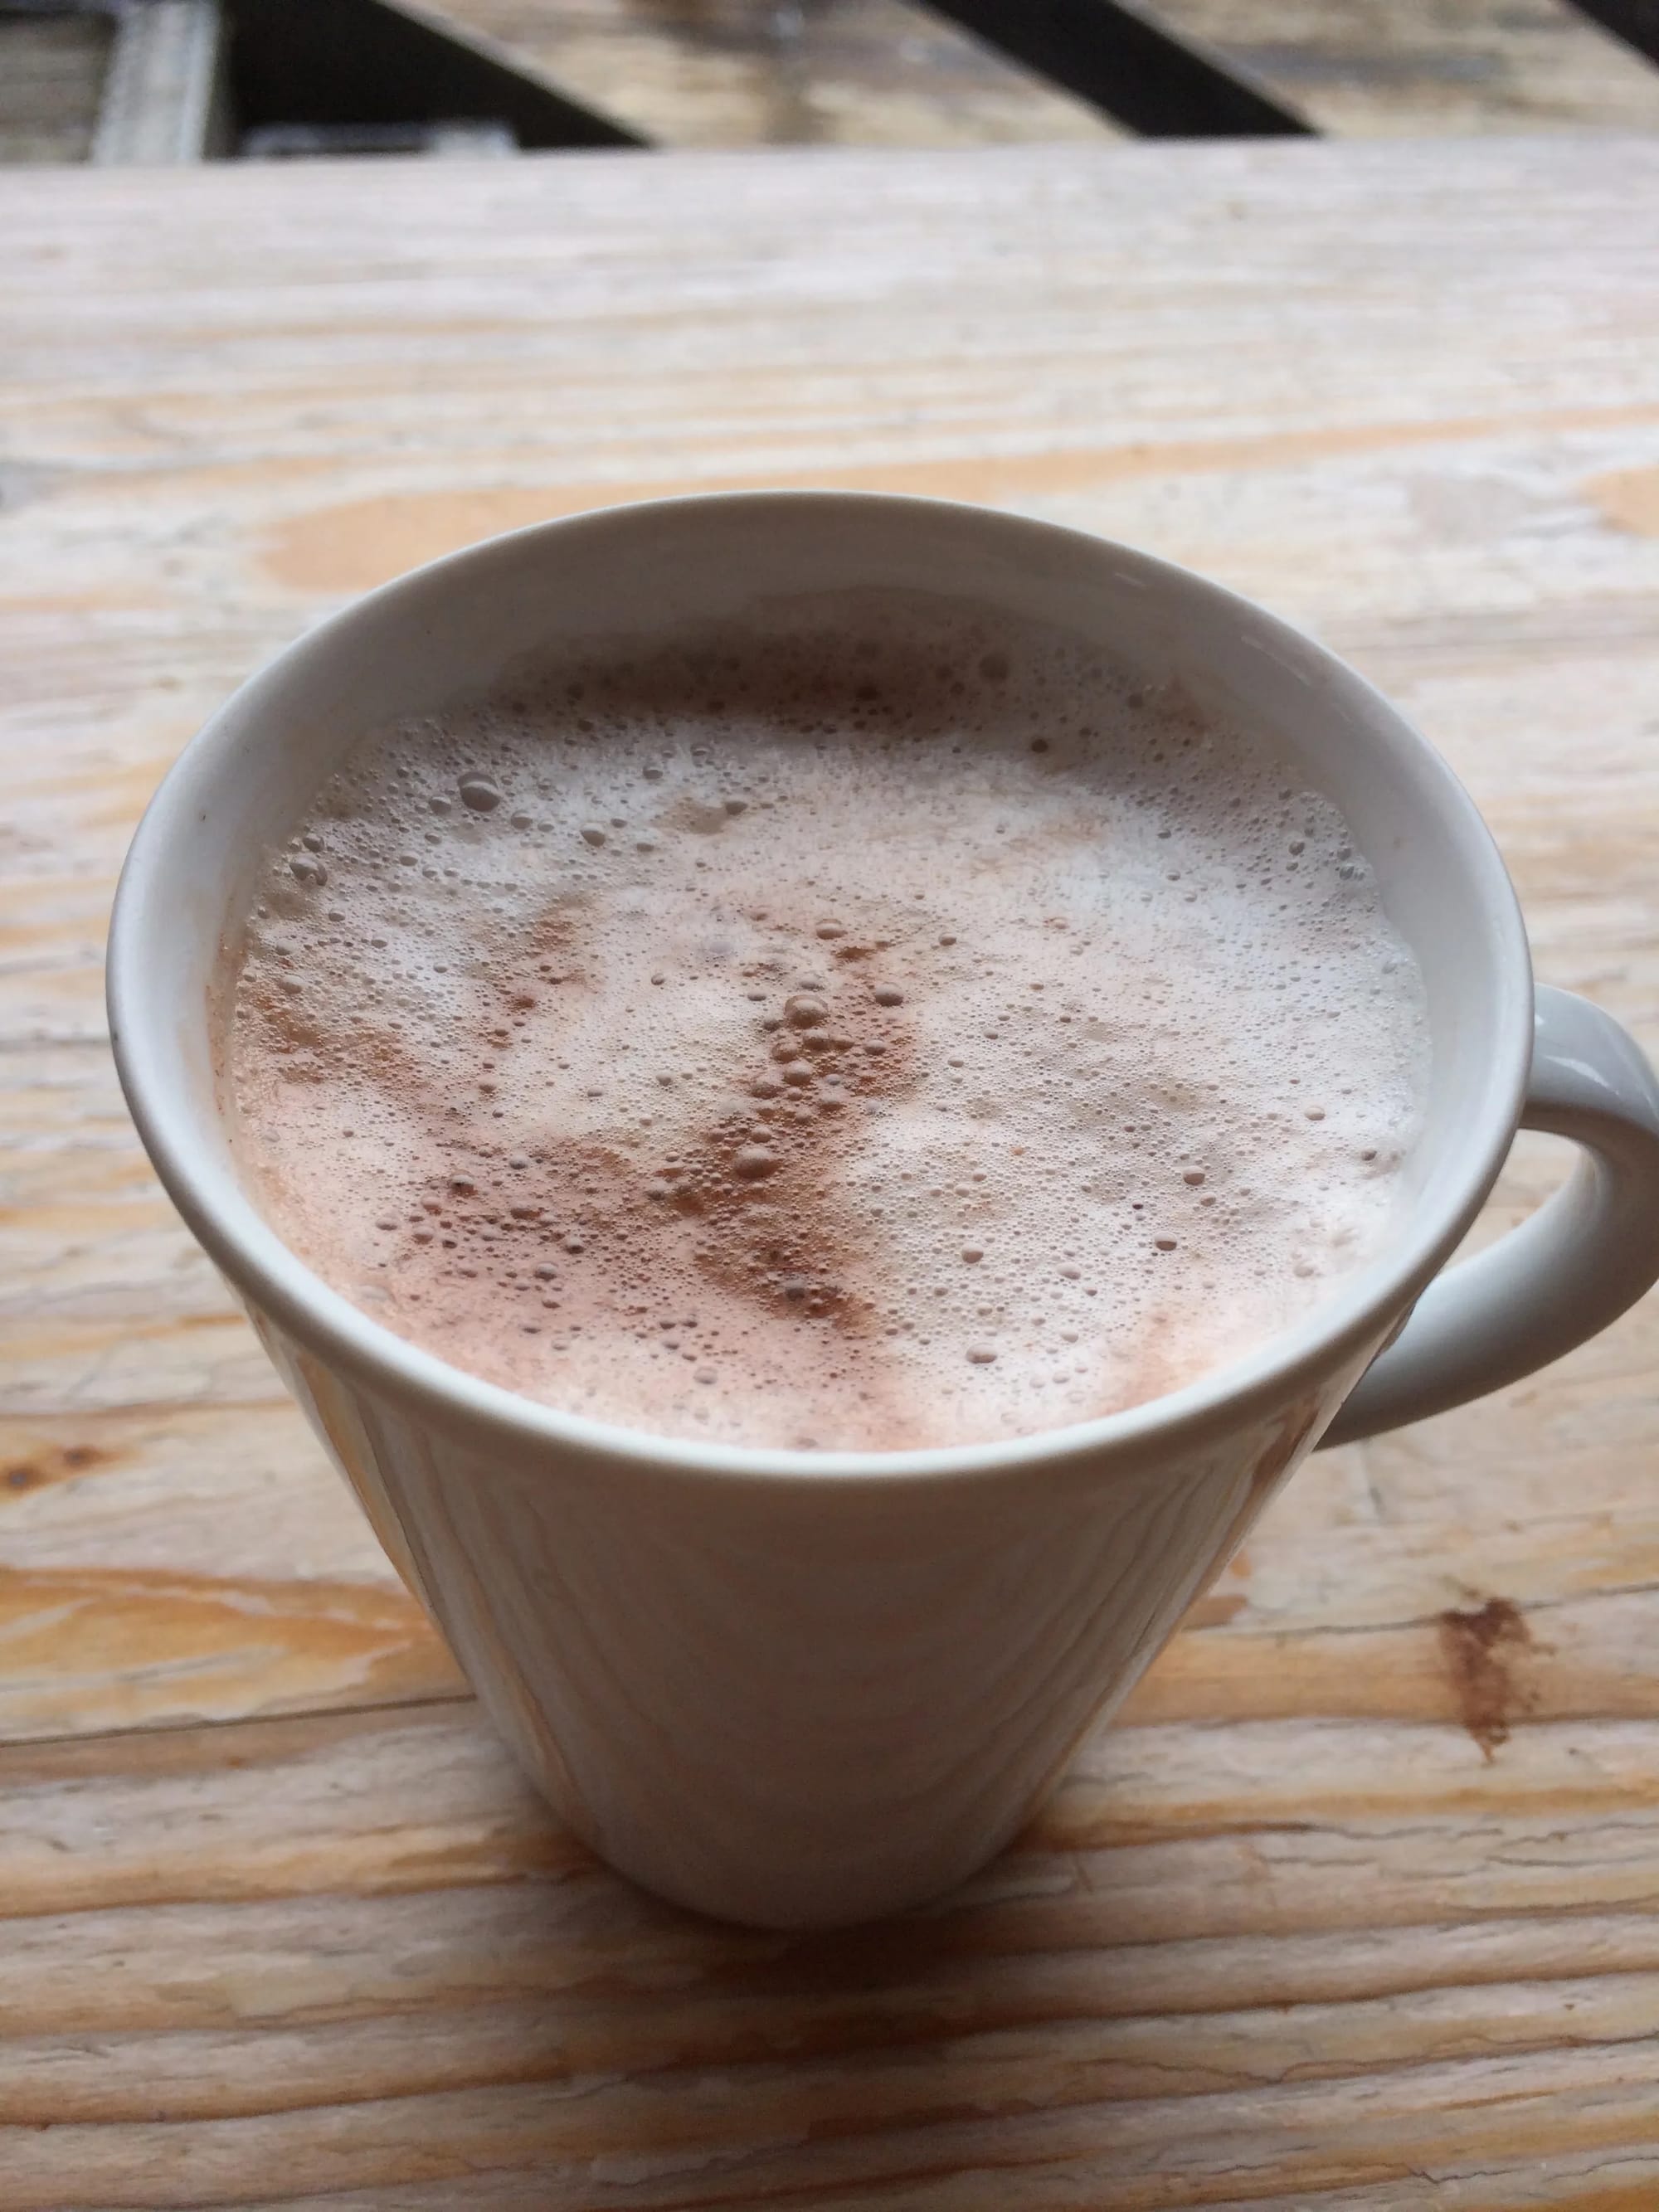 Photo by Author — Hot Chocolate at Bifangalm